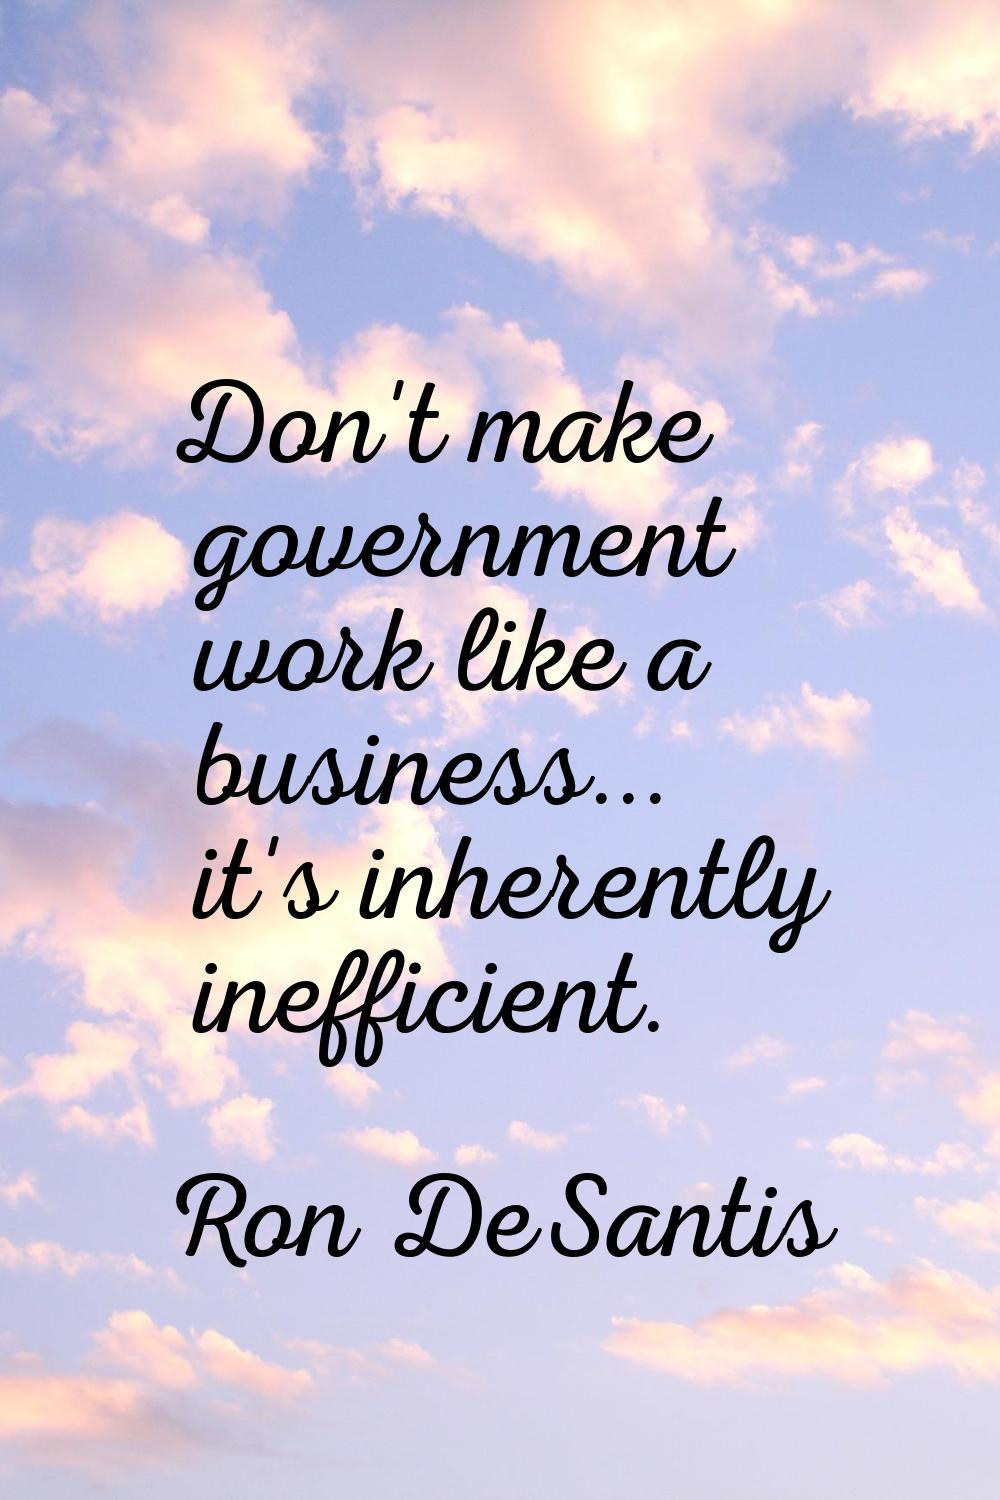 Don't make government work like a business... it's inherently inefficient.